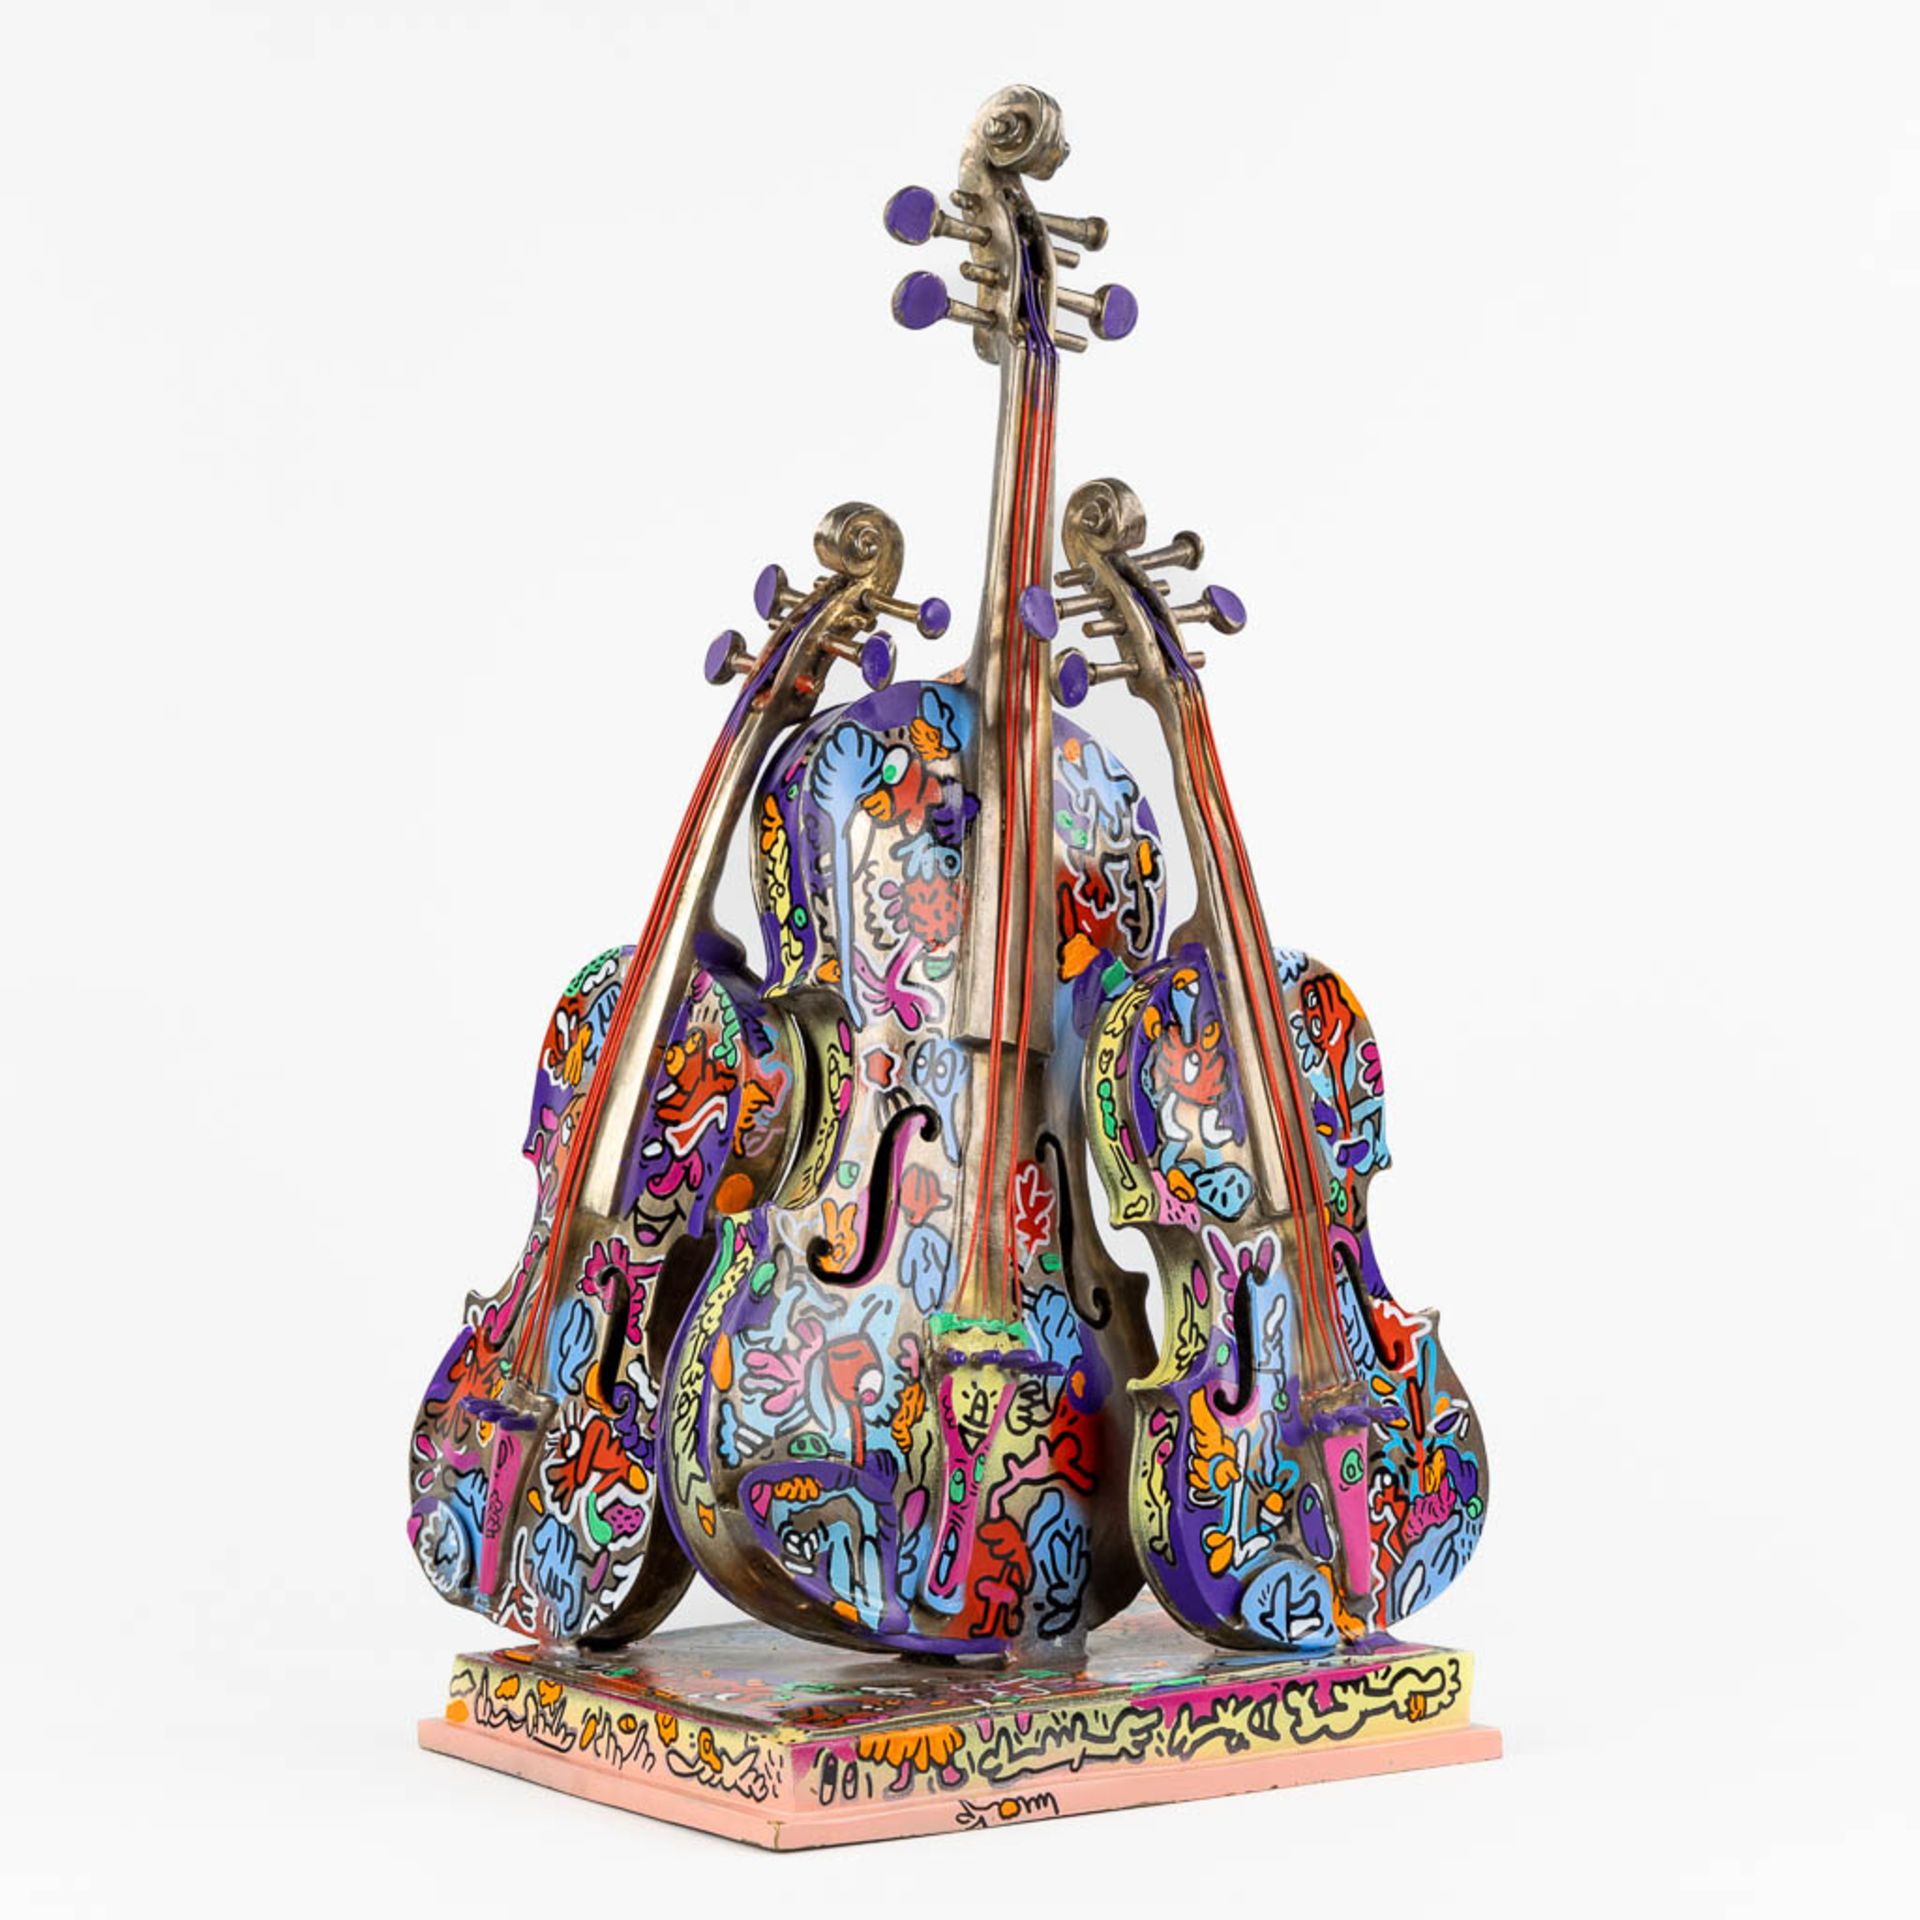 Joke 'Jook Doodle' NEYRINCK (1982) 'The love for music' colorfully patinated and 'Doodled' bronze. - Bild 12 aus 14